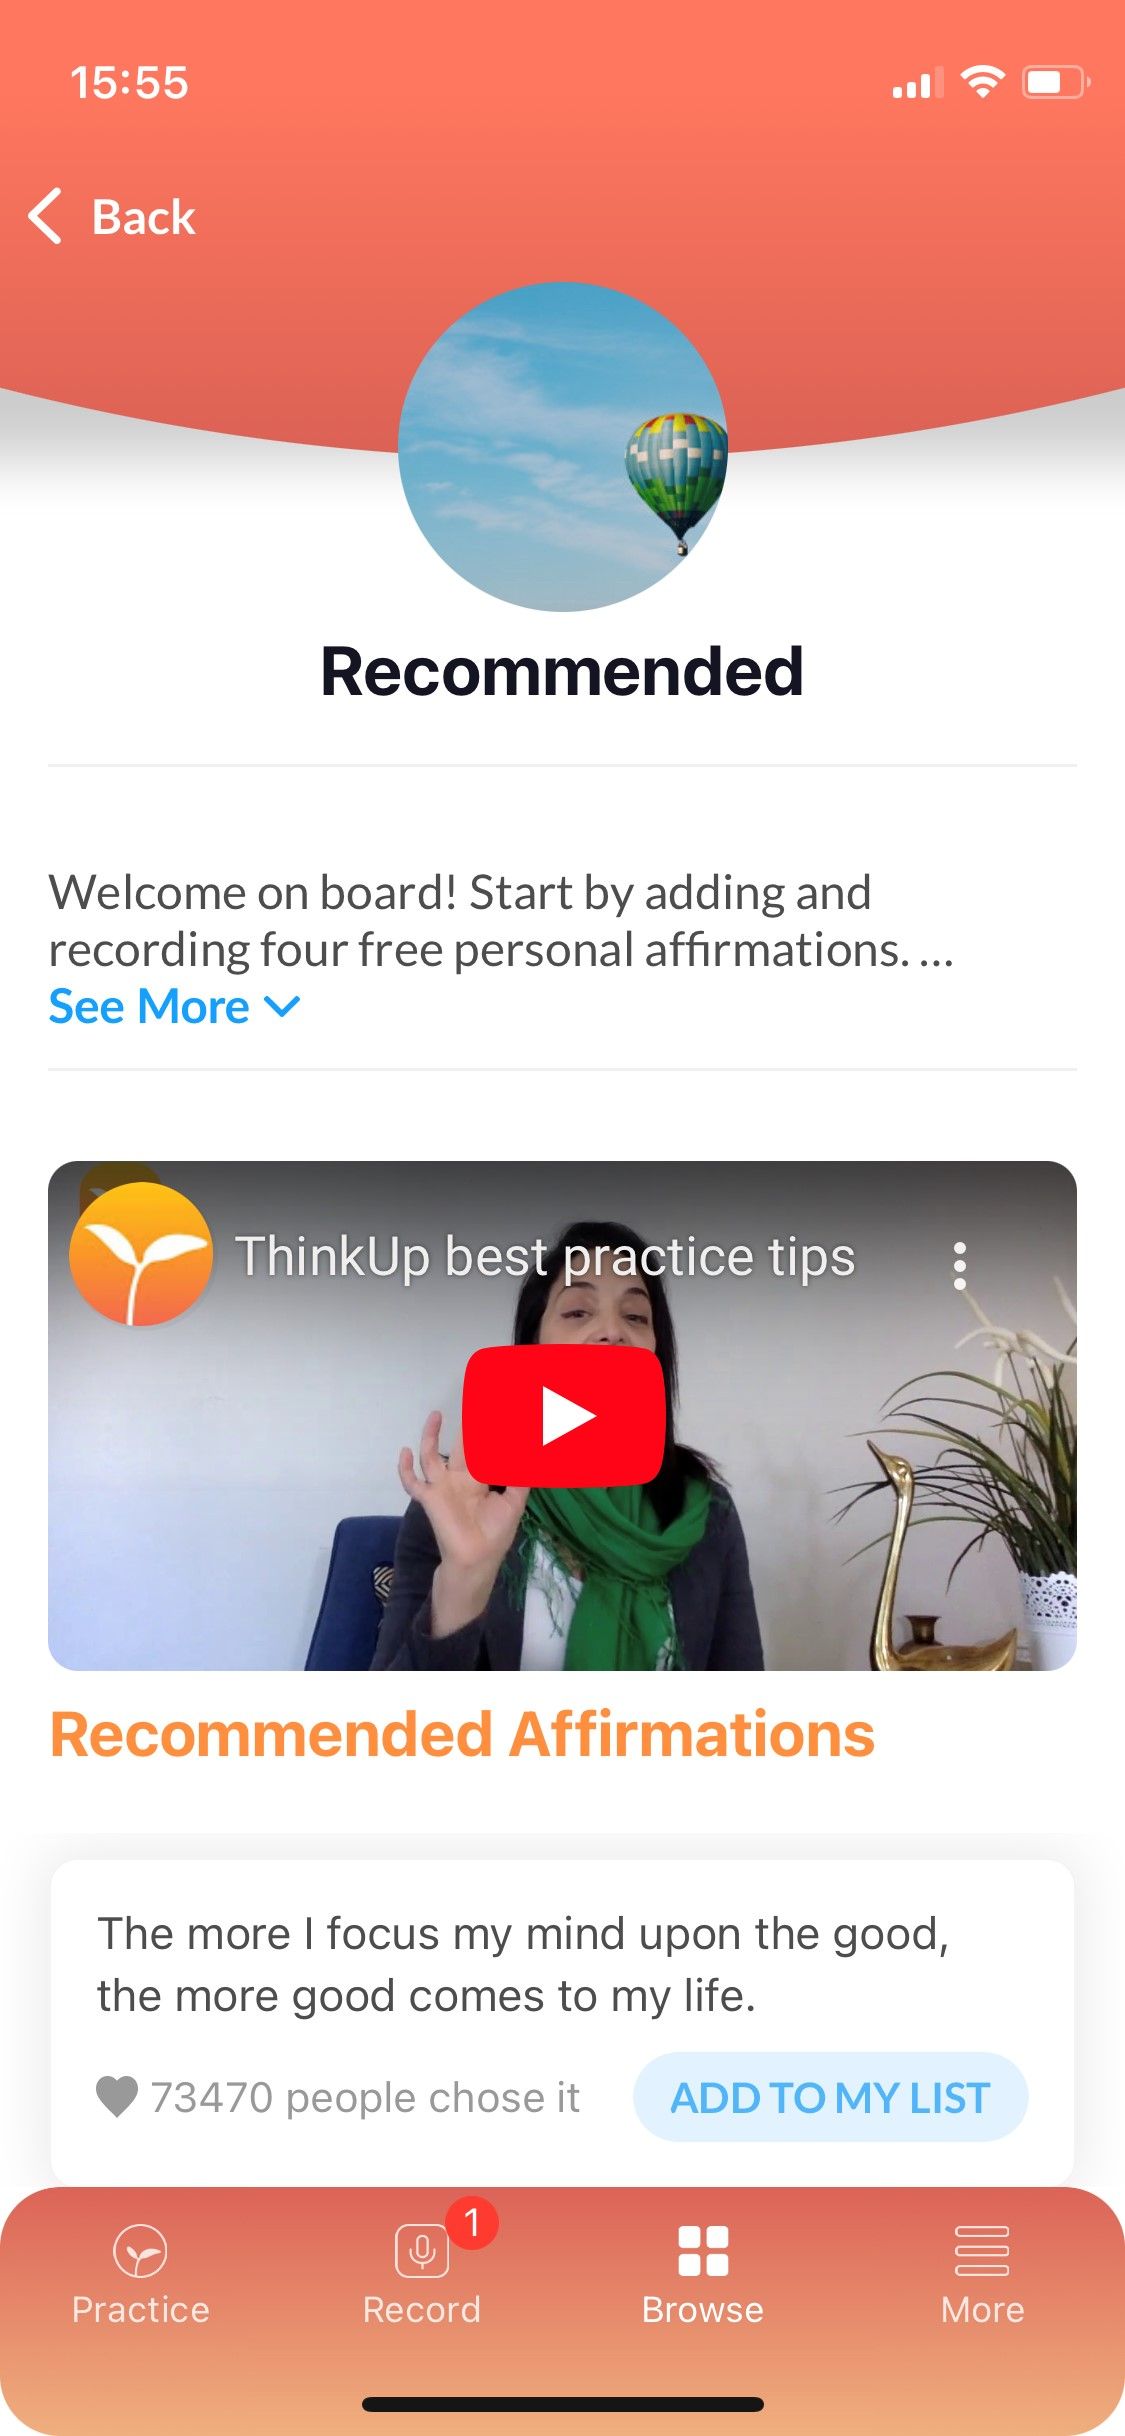 ThinkUp Recommended affirmations